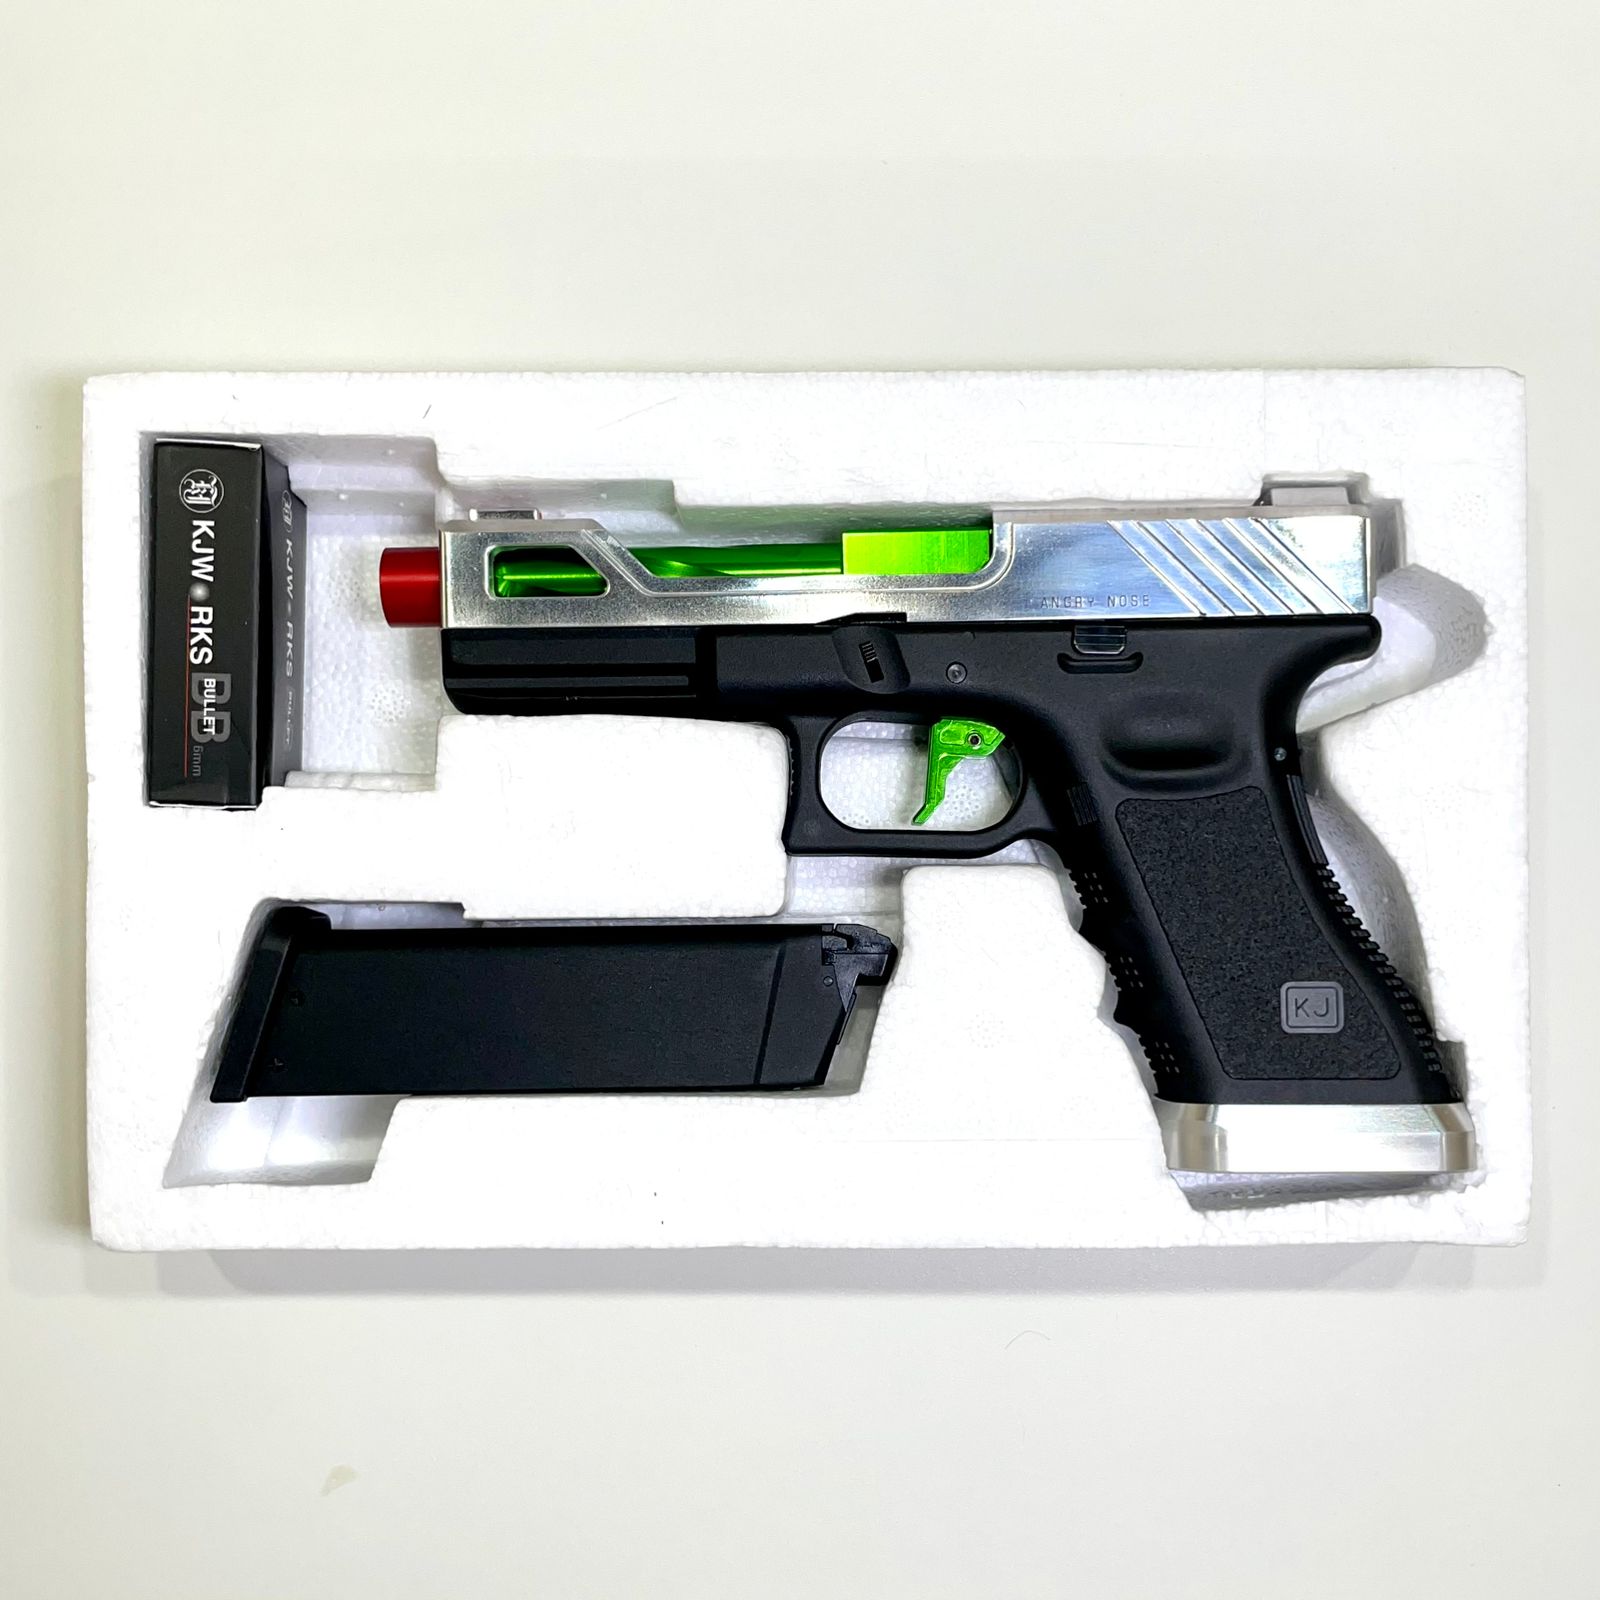 X Glock KP-17 Custon by Angry Nose (Buzz Lightyear)